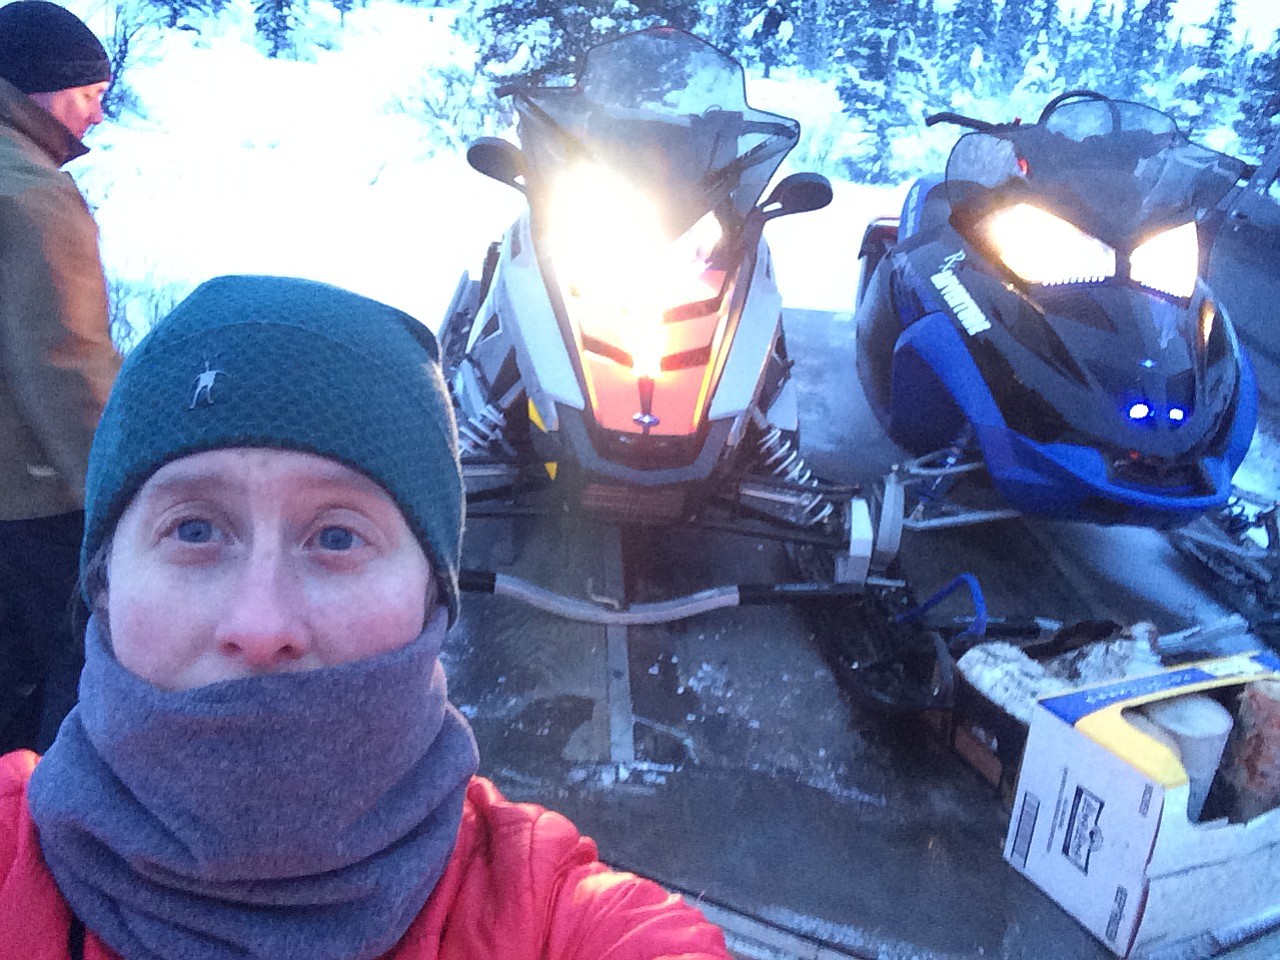 Beth Ipsen takes a selfie showing her clothing and snowmobiles in 2013 before heading out in the wilderness near Cantwell, Alaska.